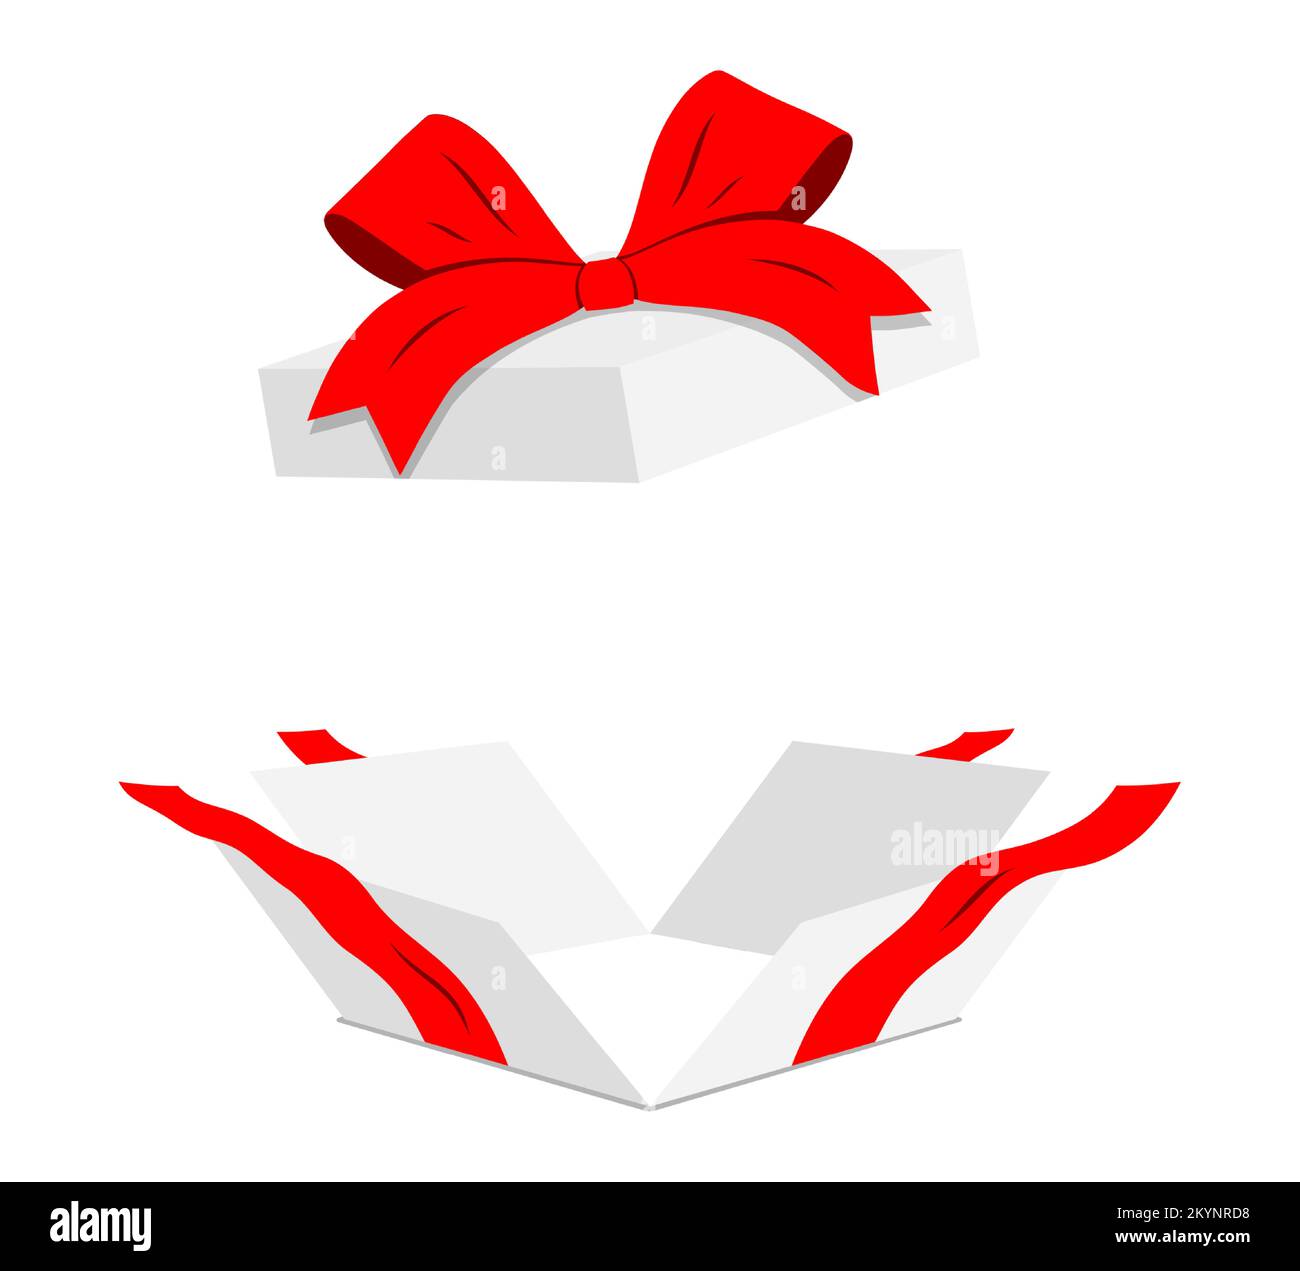 Open white gift box with red ribbon, isolated on background. Flat style present box vector illustration. Stock Vector